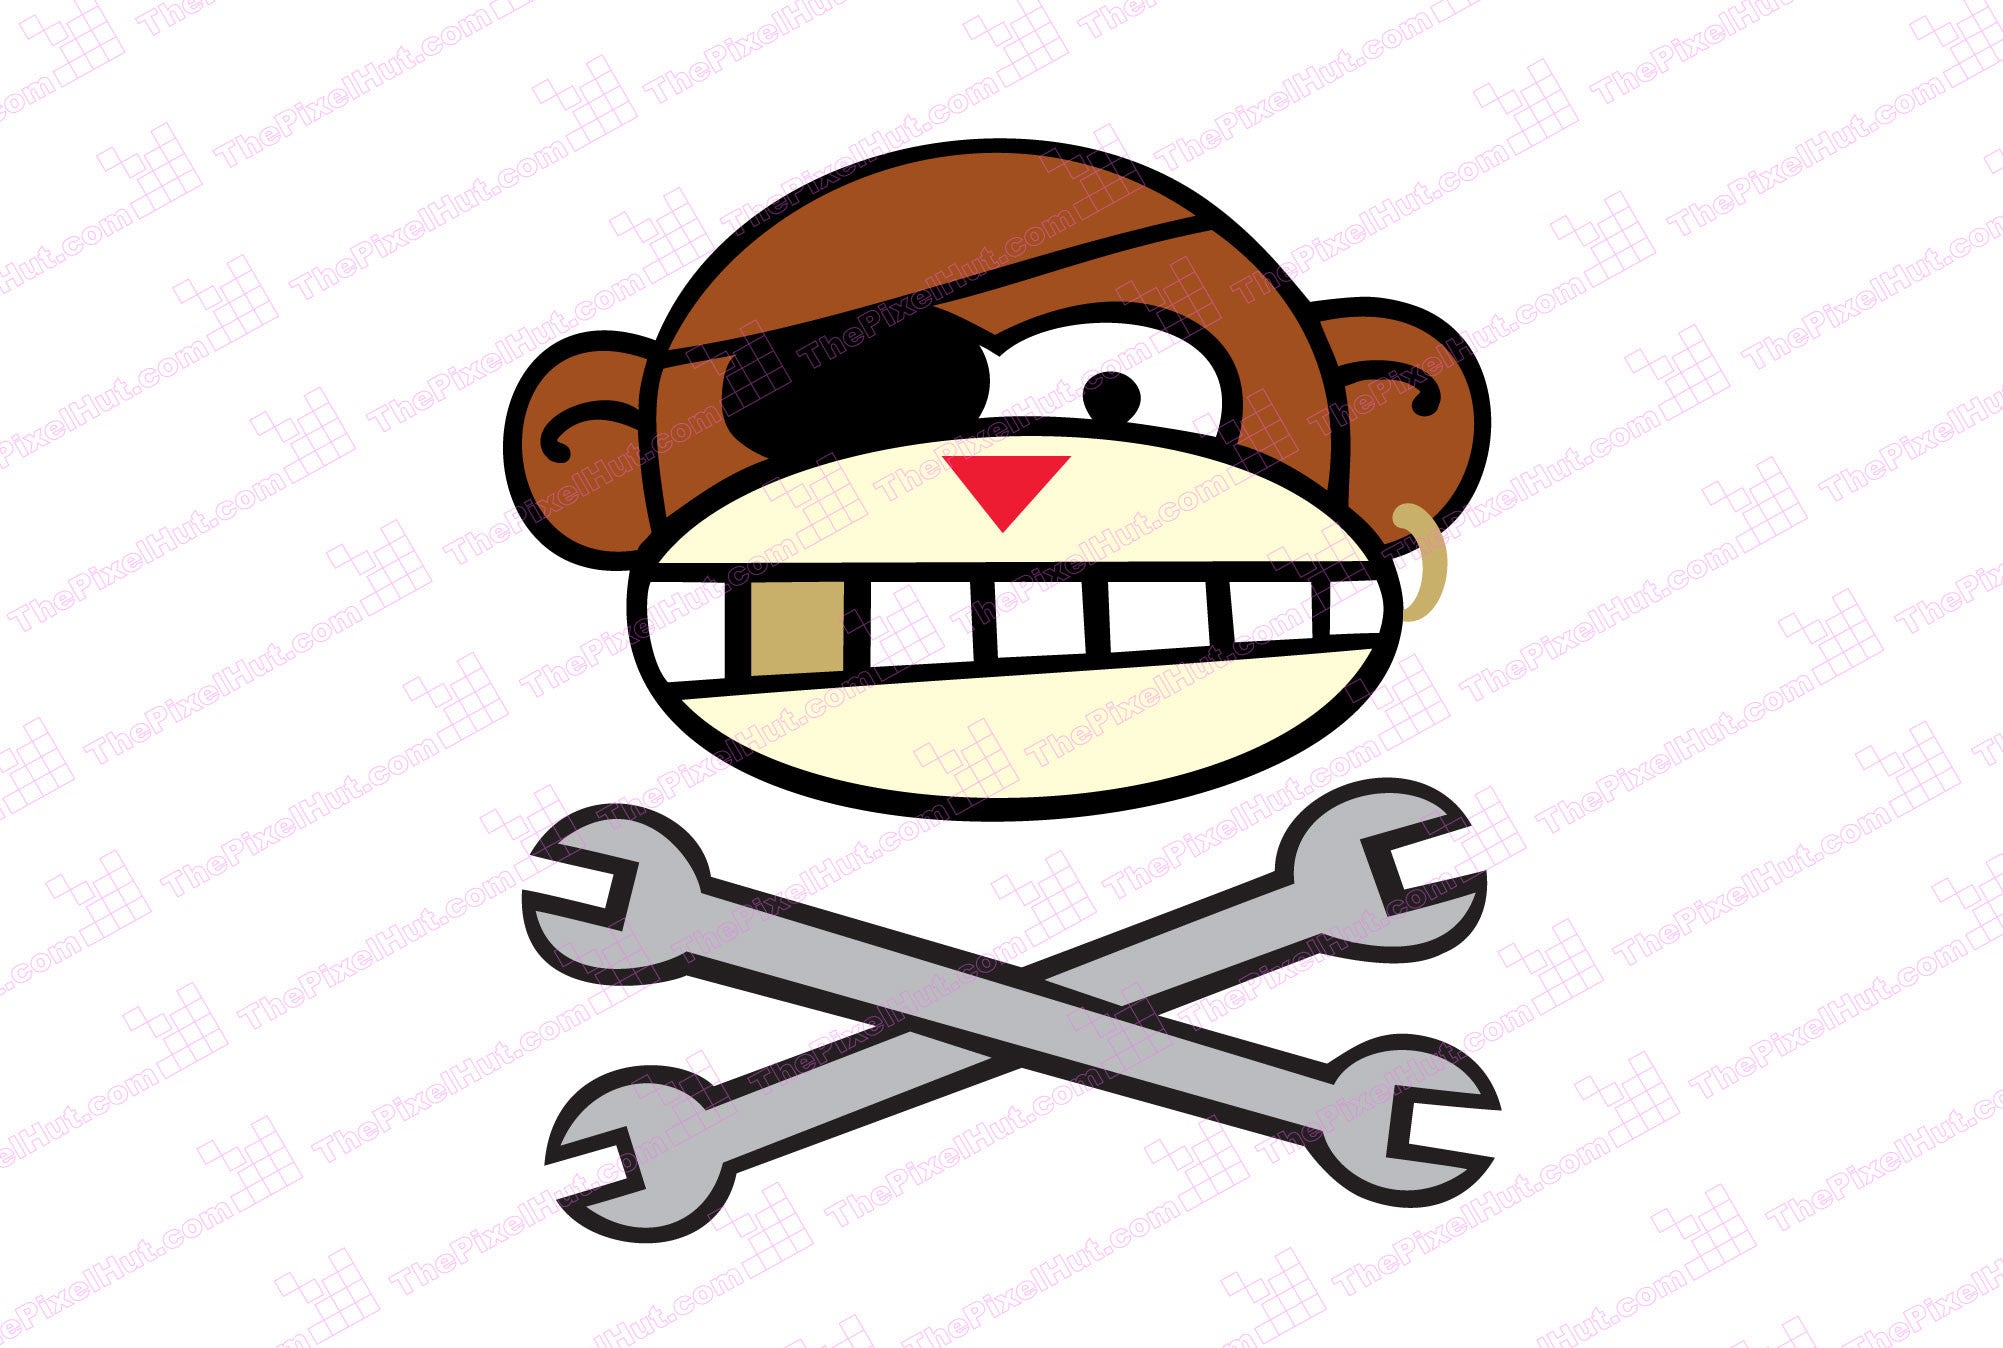 The Original Monkey Wrench Full Color Decal